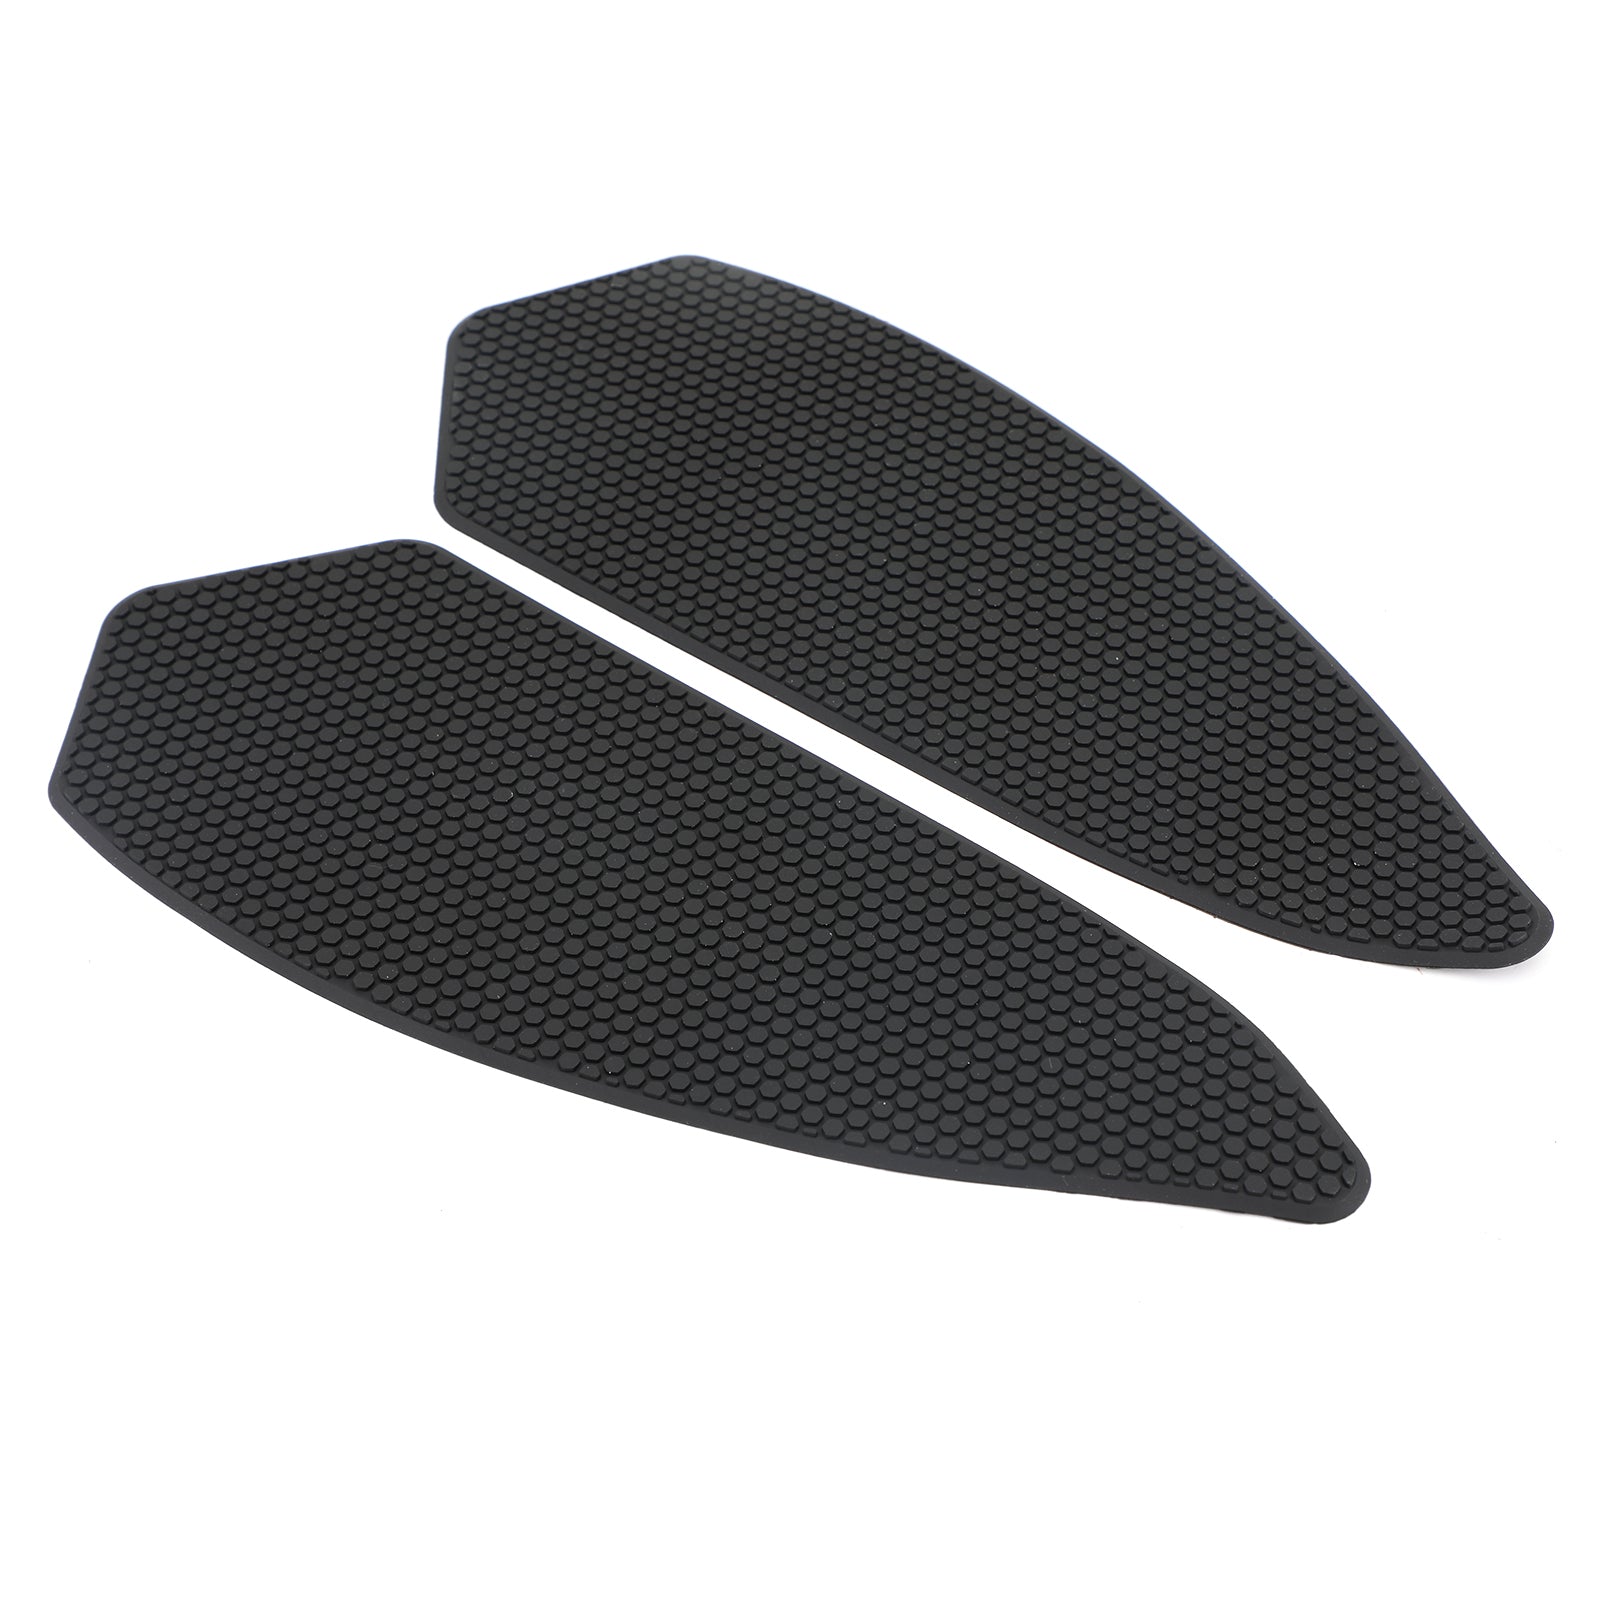 Tank Side Pads Traction Grips Fit For BMW S 1000 RR S1000RR 2020 Black